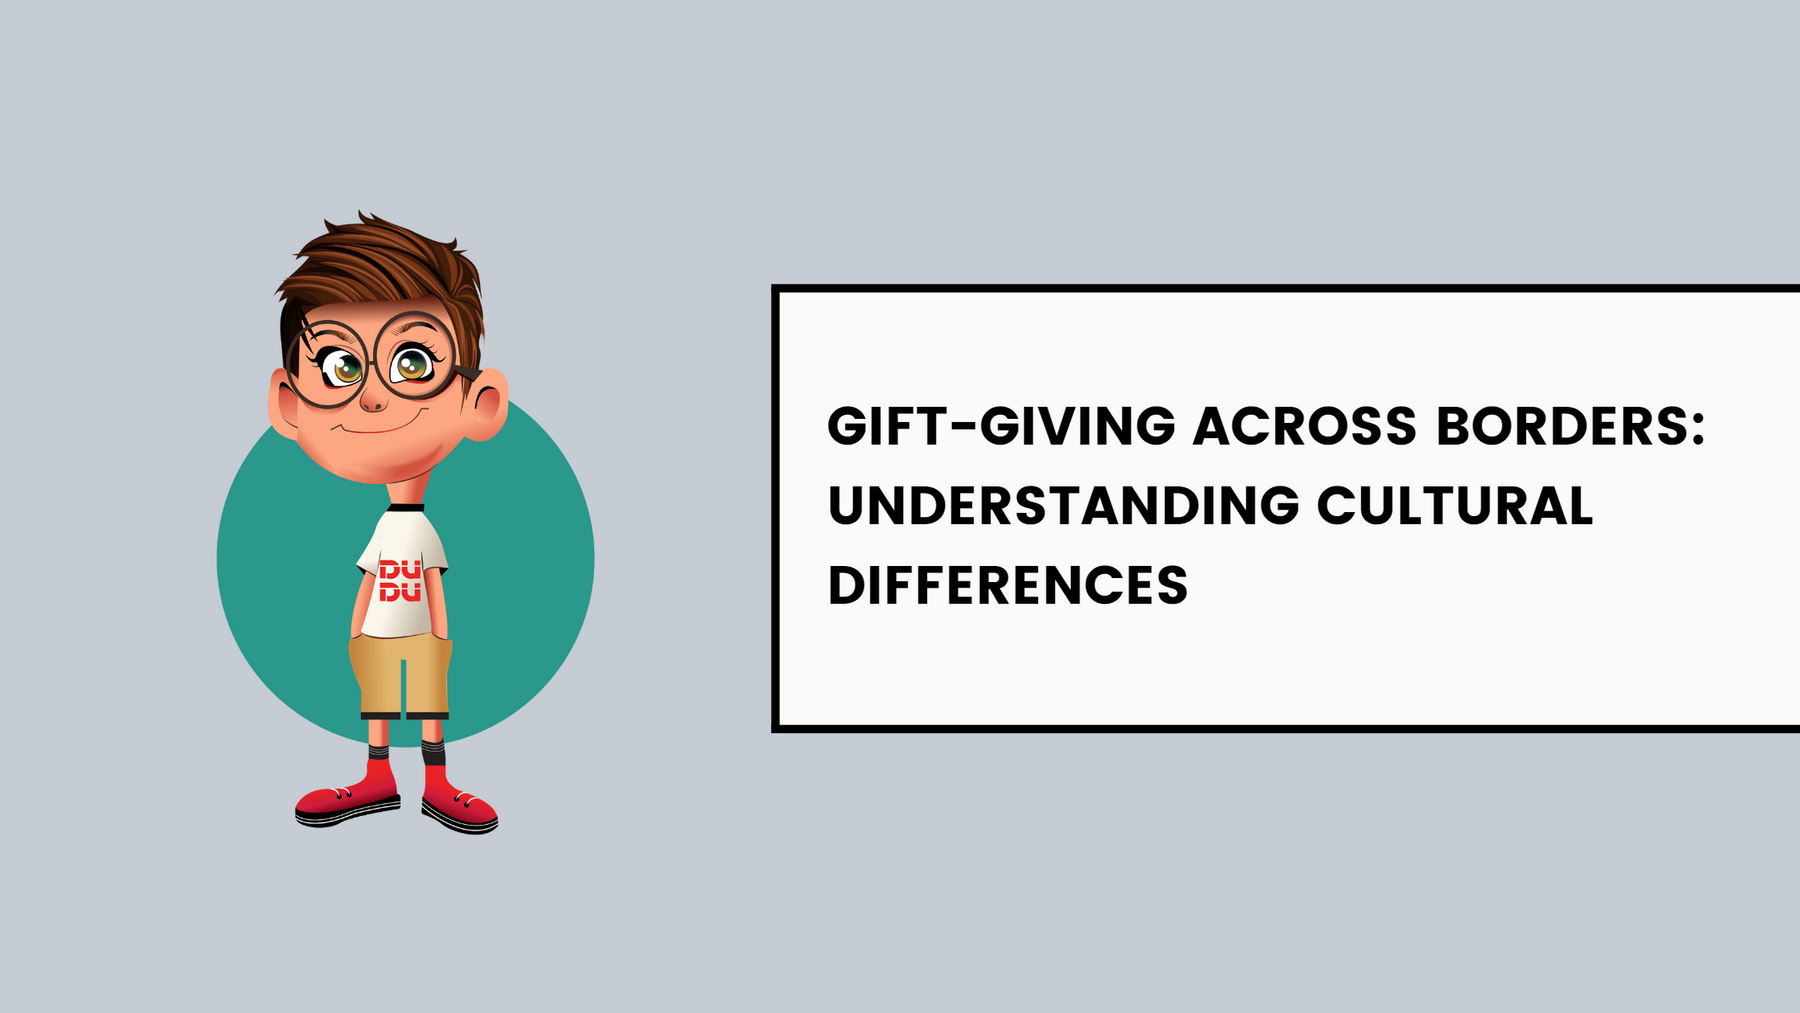 Gift-Giving Across Borders: Understanding Cultural Differences